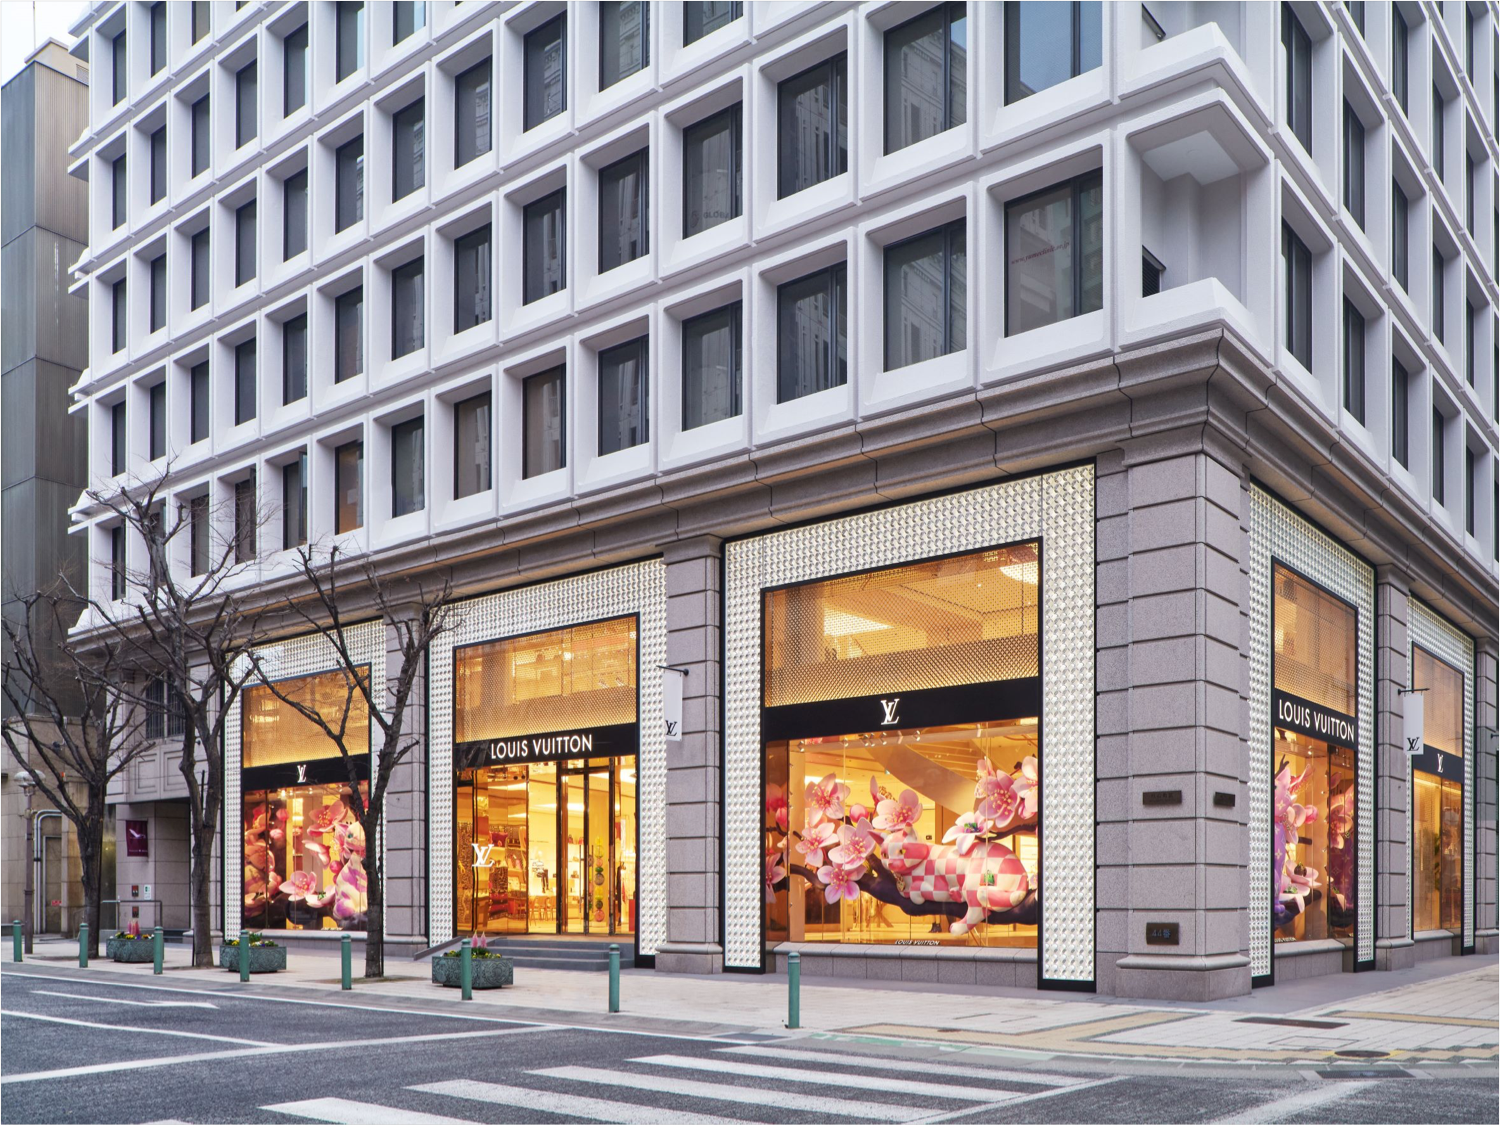 Louis Vuitton flagship store in the street retail – Stock